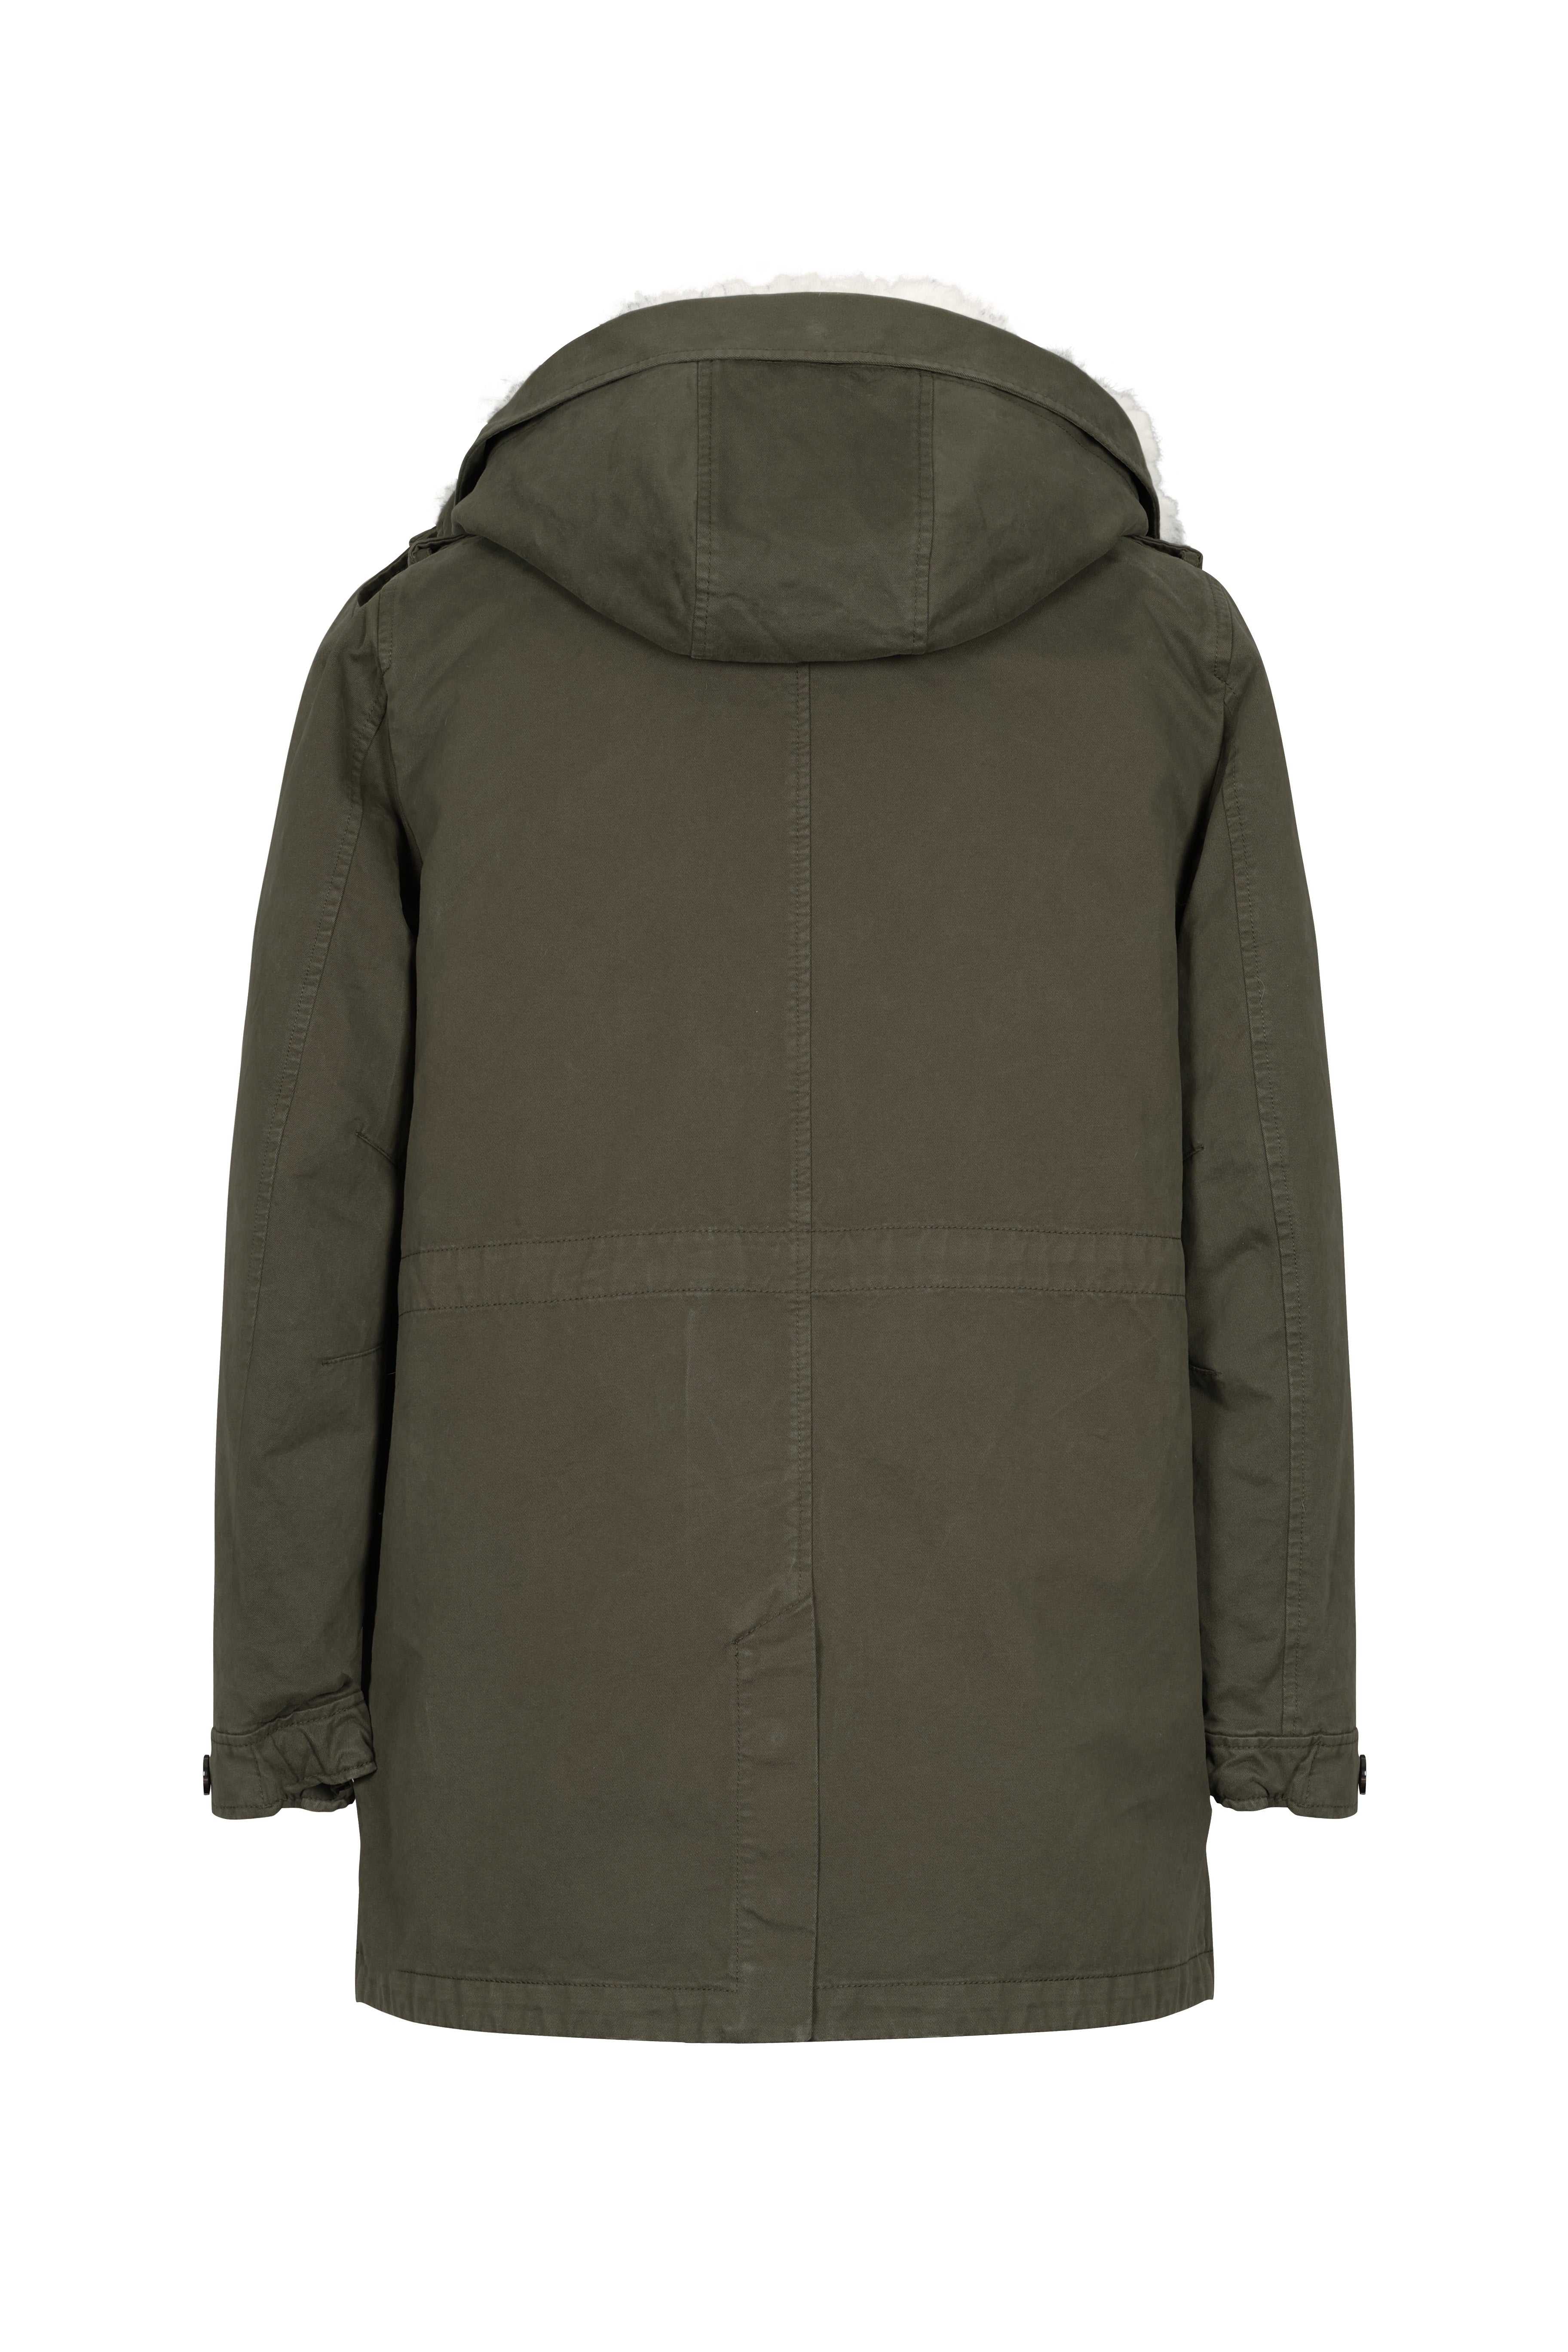 Lempelius Mens cotton Parka with curly shearling in cold green